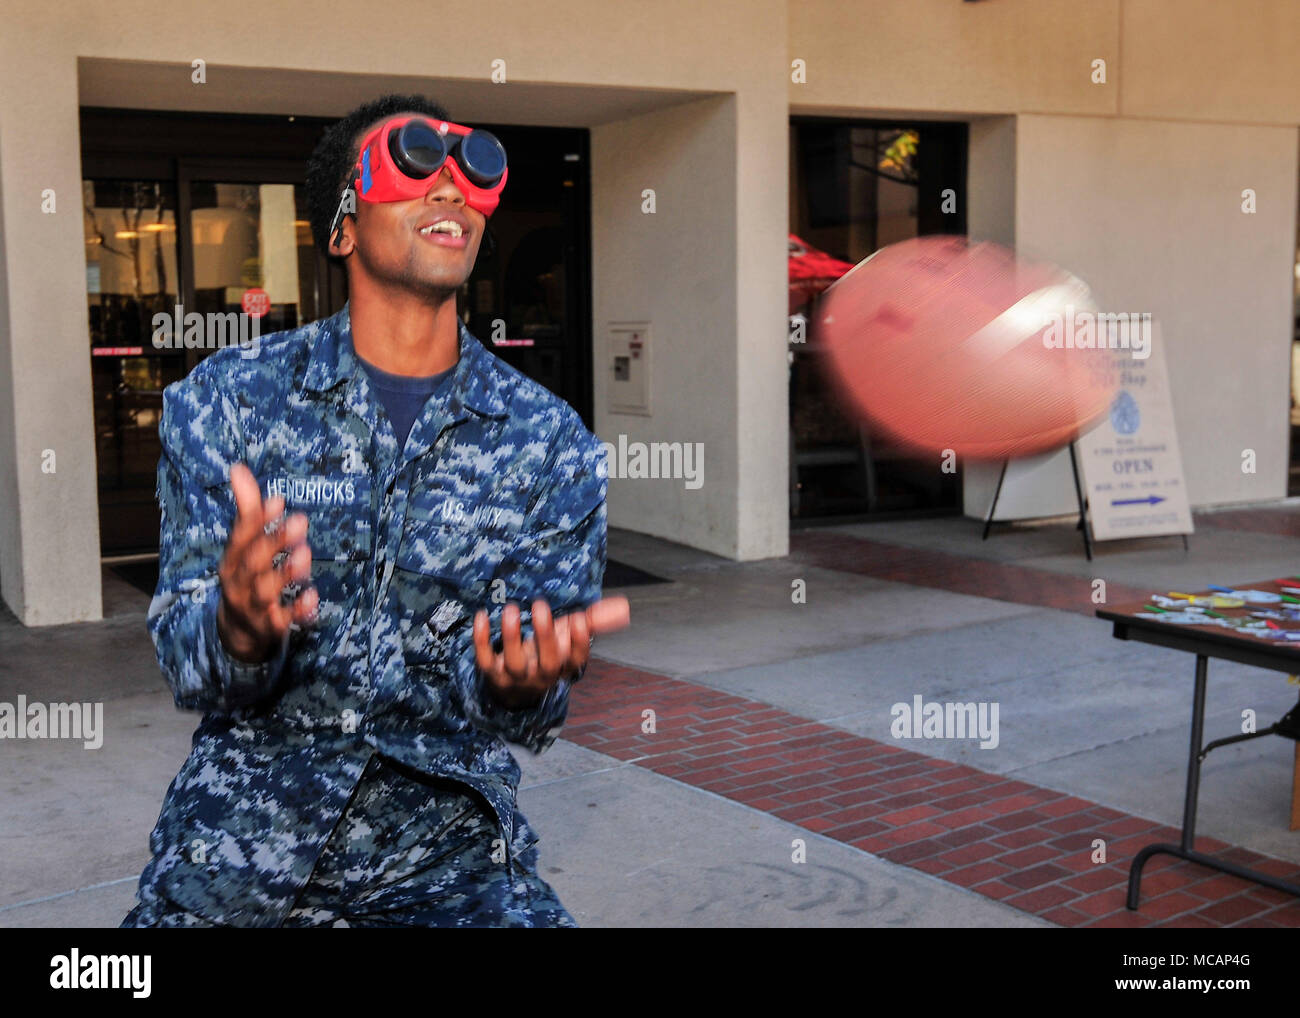 180201-N-PN275-1056 SAN DIEGO (Feb. 1, 2018) Hospital Corpsman Seaman Apprentice Tremaini Hendricks, assigned to Naval Medical Center San Diego (NMCSD), attempts to catch a football while wearing drunk goggles at NMCSD’s Drug and Alcohol Programs Advisor (DAPA) event. The DAPA event is designed to promote safe decision making and inform Sailors of the dangers of drug and alcohol abuse. ( U.S. Navy photo by Mass Communication Specialist 2nd Class Zachary Kreitzer) Stock Photo